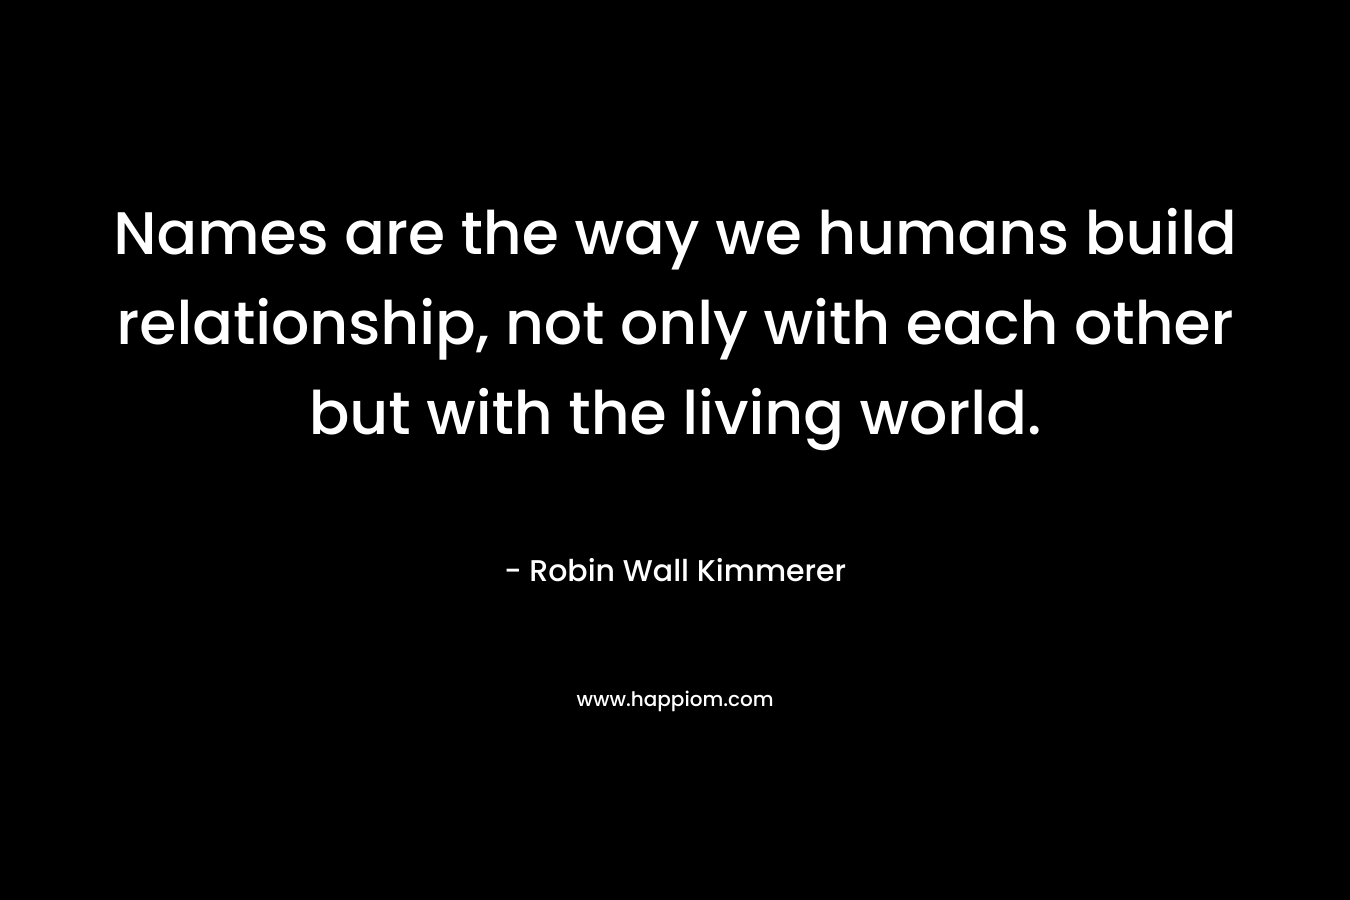 Names are the way we humans build relationship, not only with each other but with the living world. – Robin Wall Kimmerer